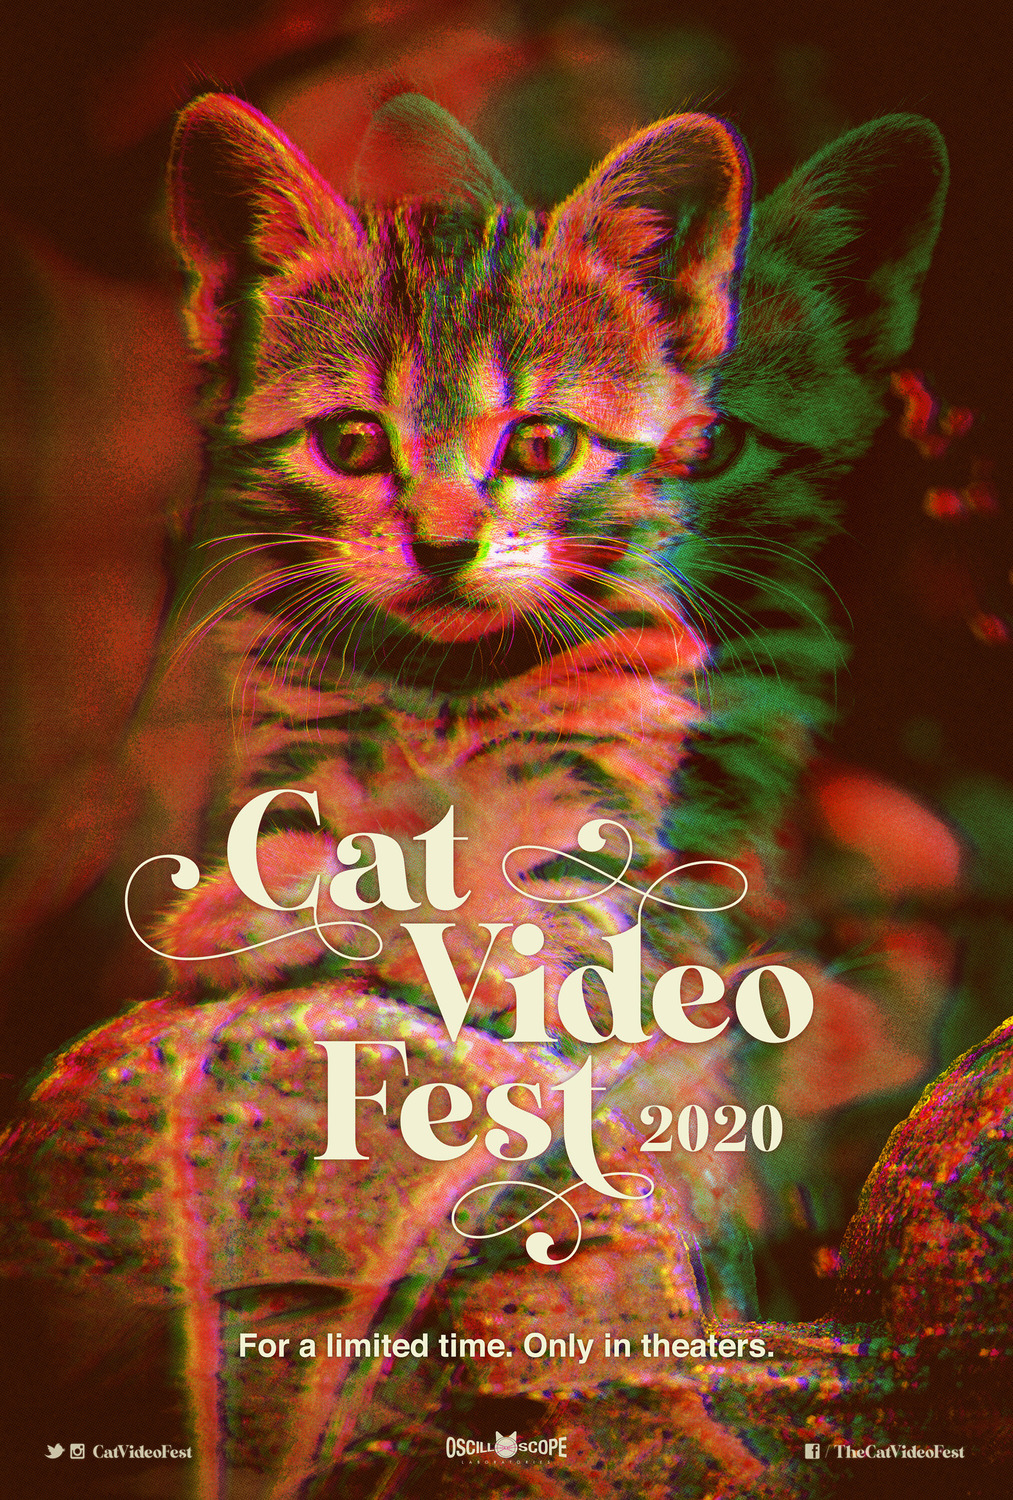 Extra Large Movie Poster Image for CatVideoFest 2020 